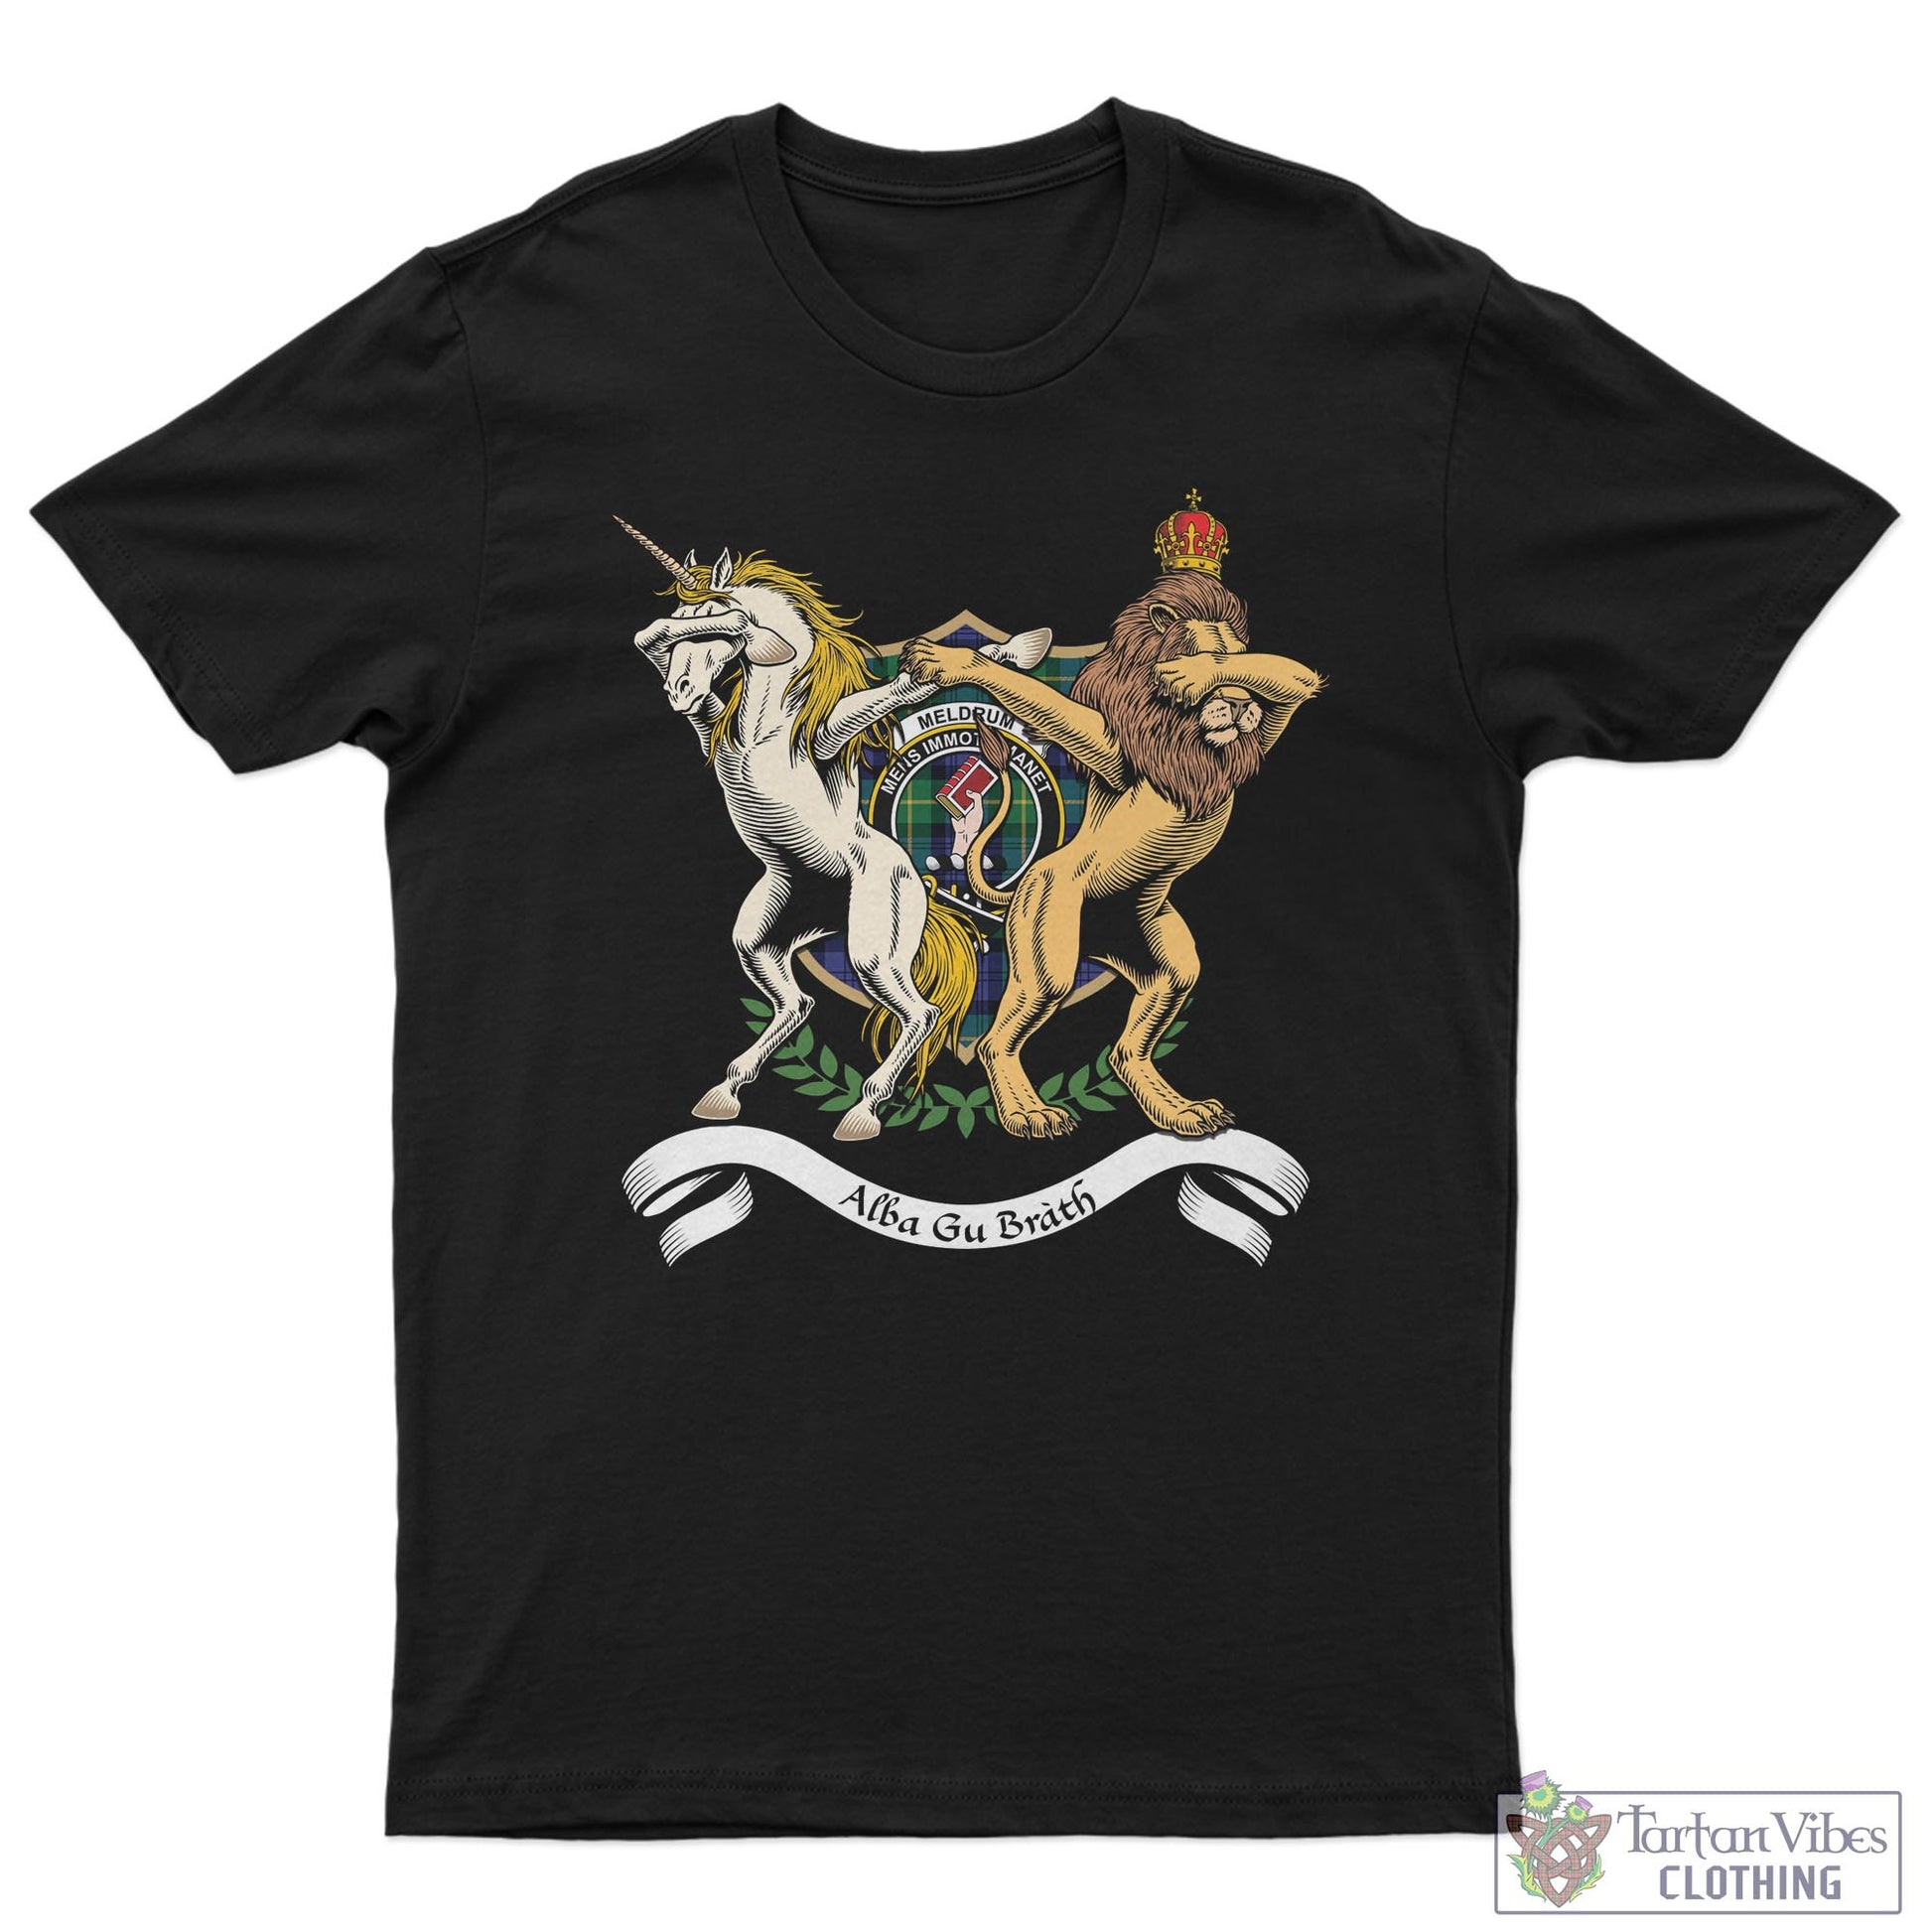 Tartan Vibes Clothing Meldrum Family Crest Cotton Men's T-Shirt with Scotland Royal Coat Of Arm Funny Style